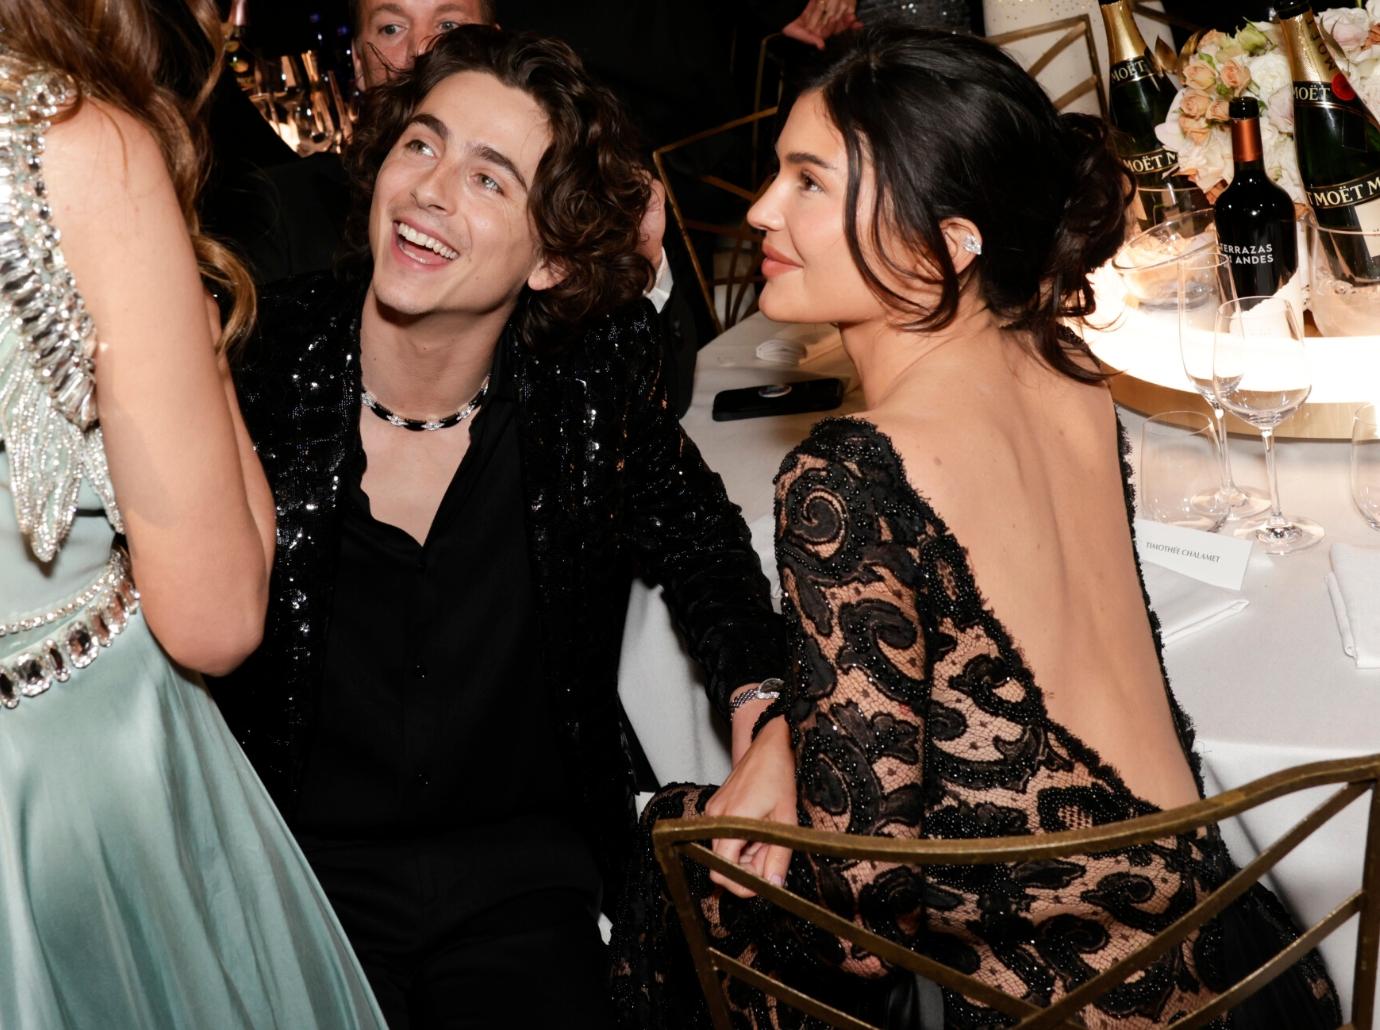 Kylie Jenner and Timothee Chalamet Are 'In Love' and 'Getting Serious